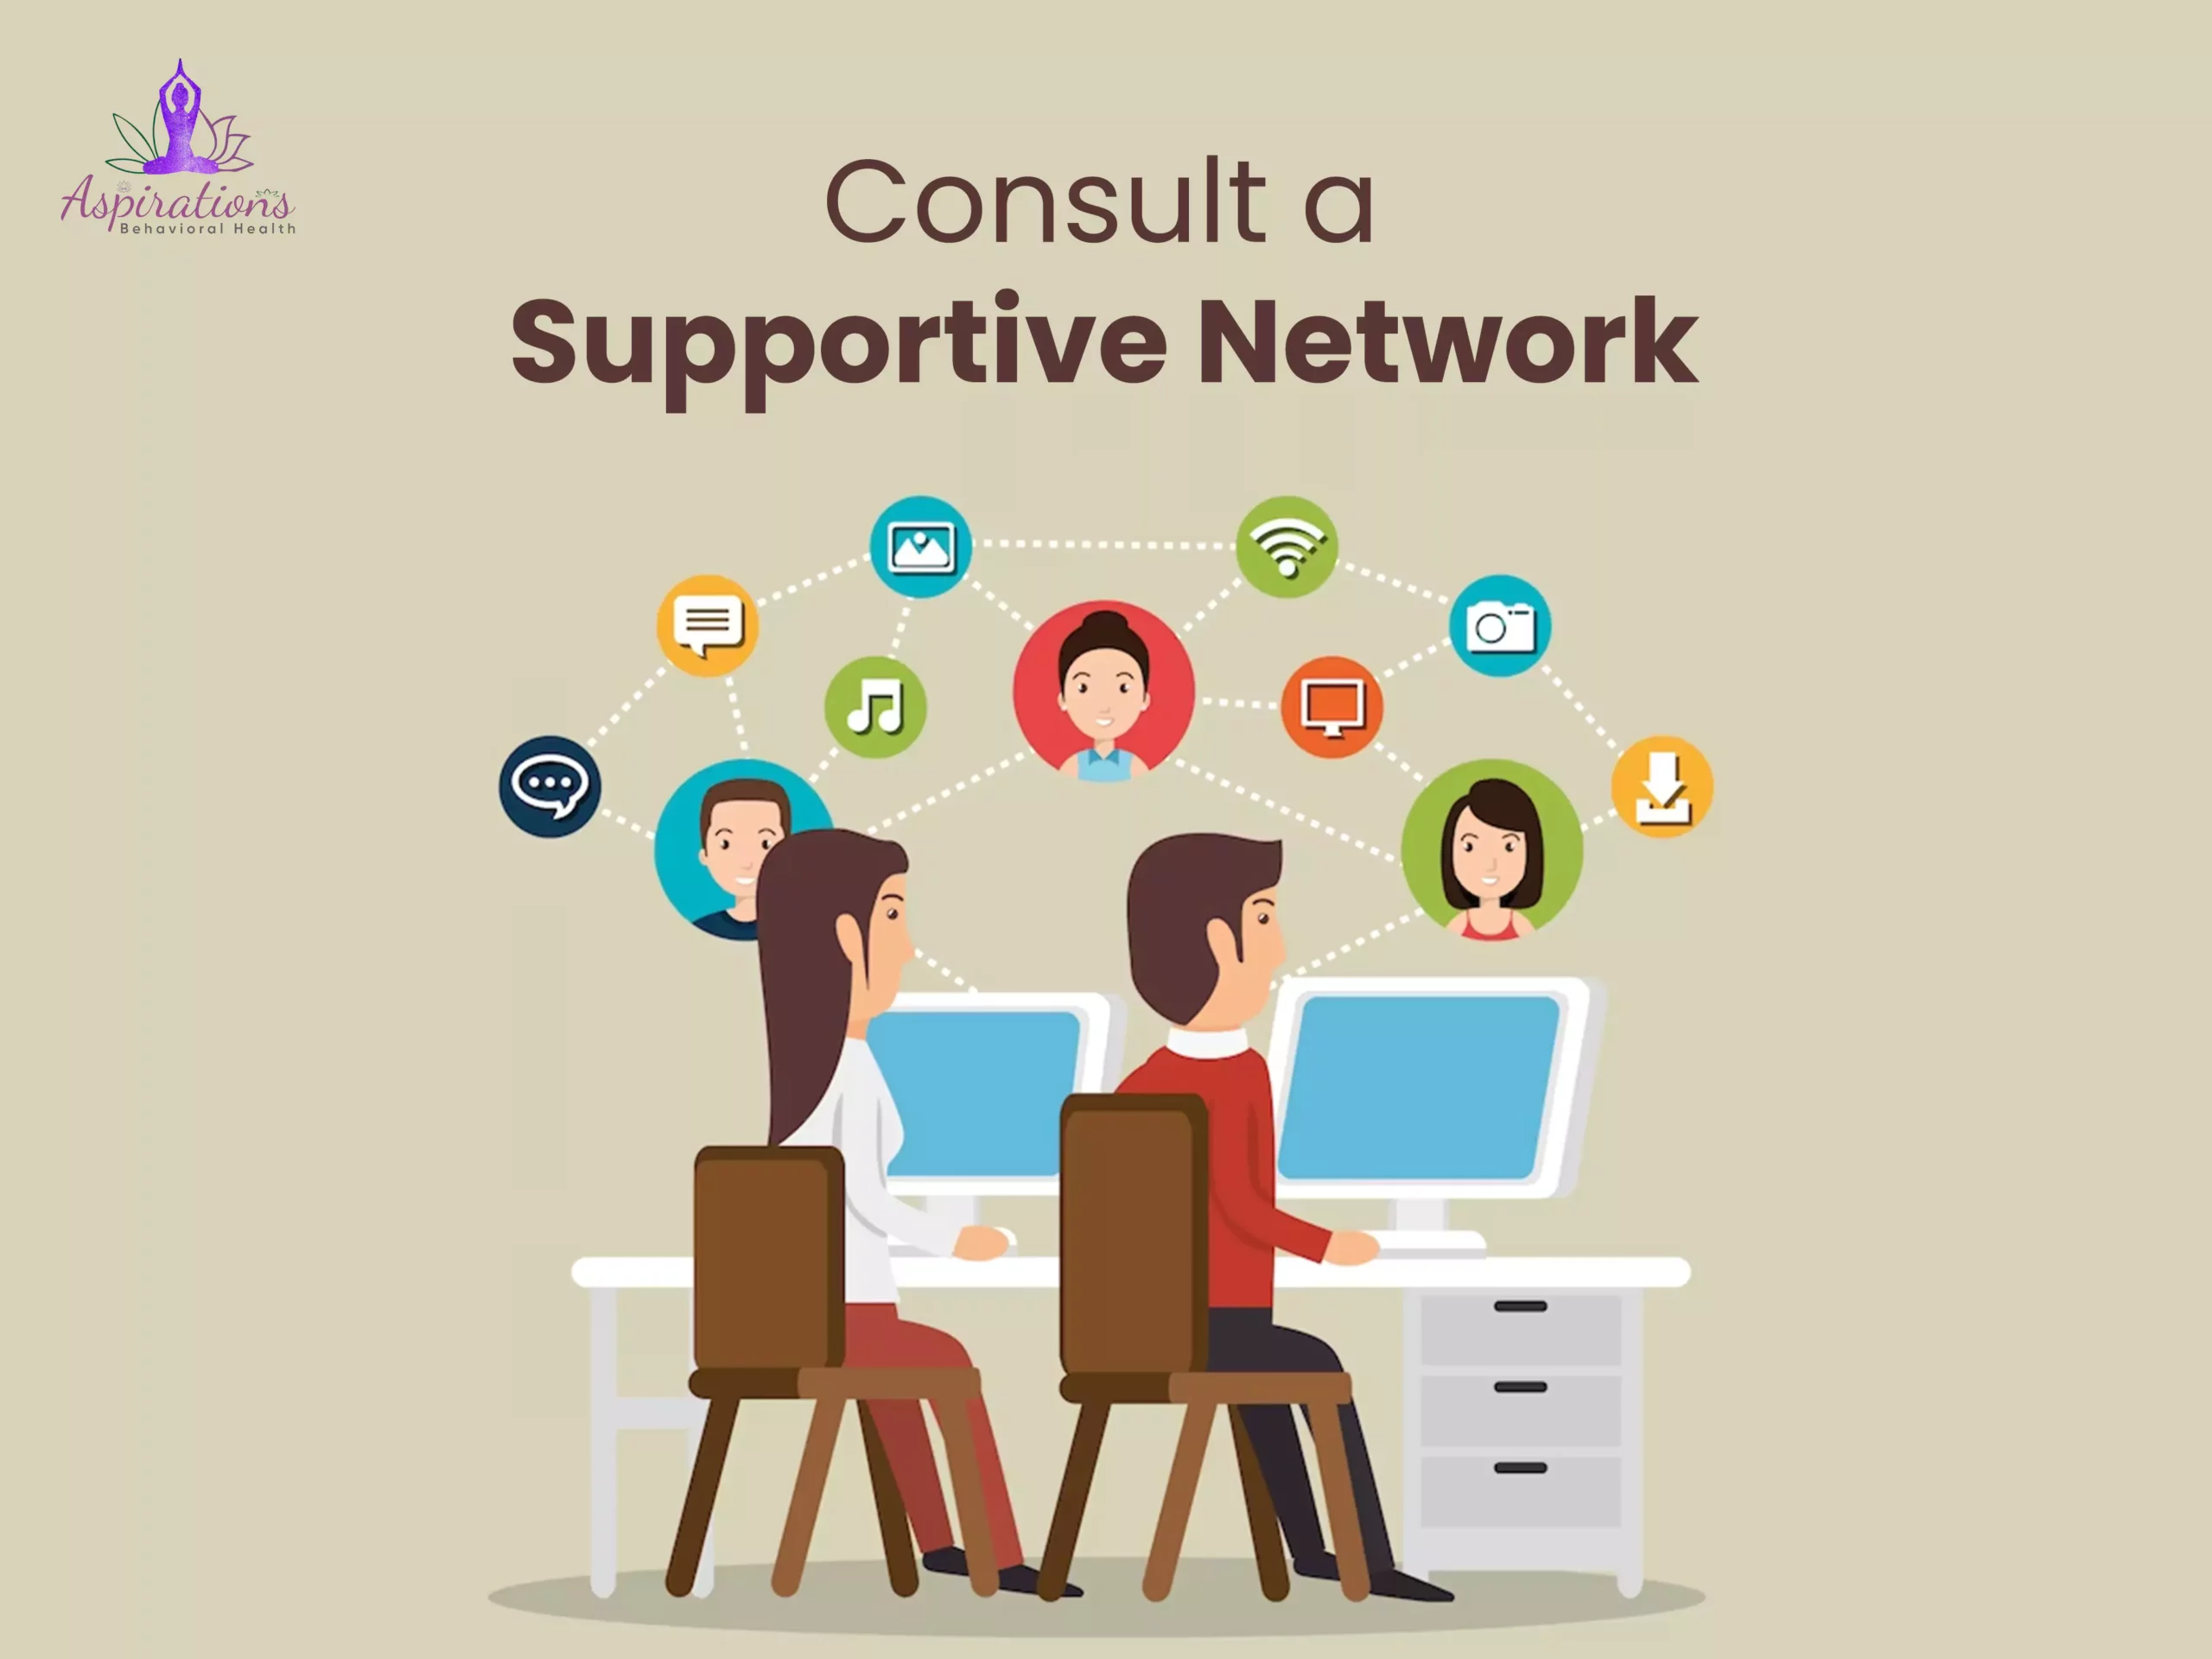 Consult a Supportive Network